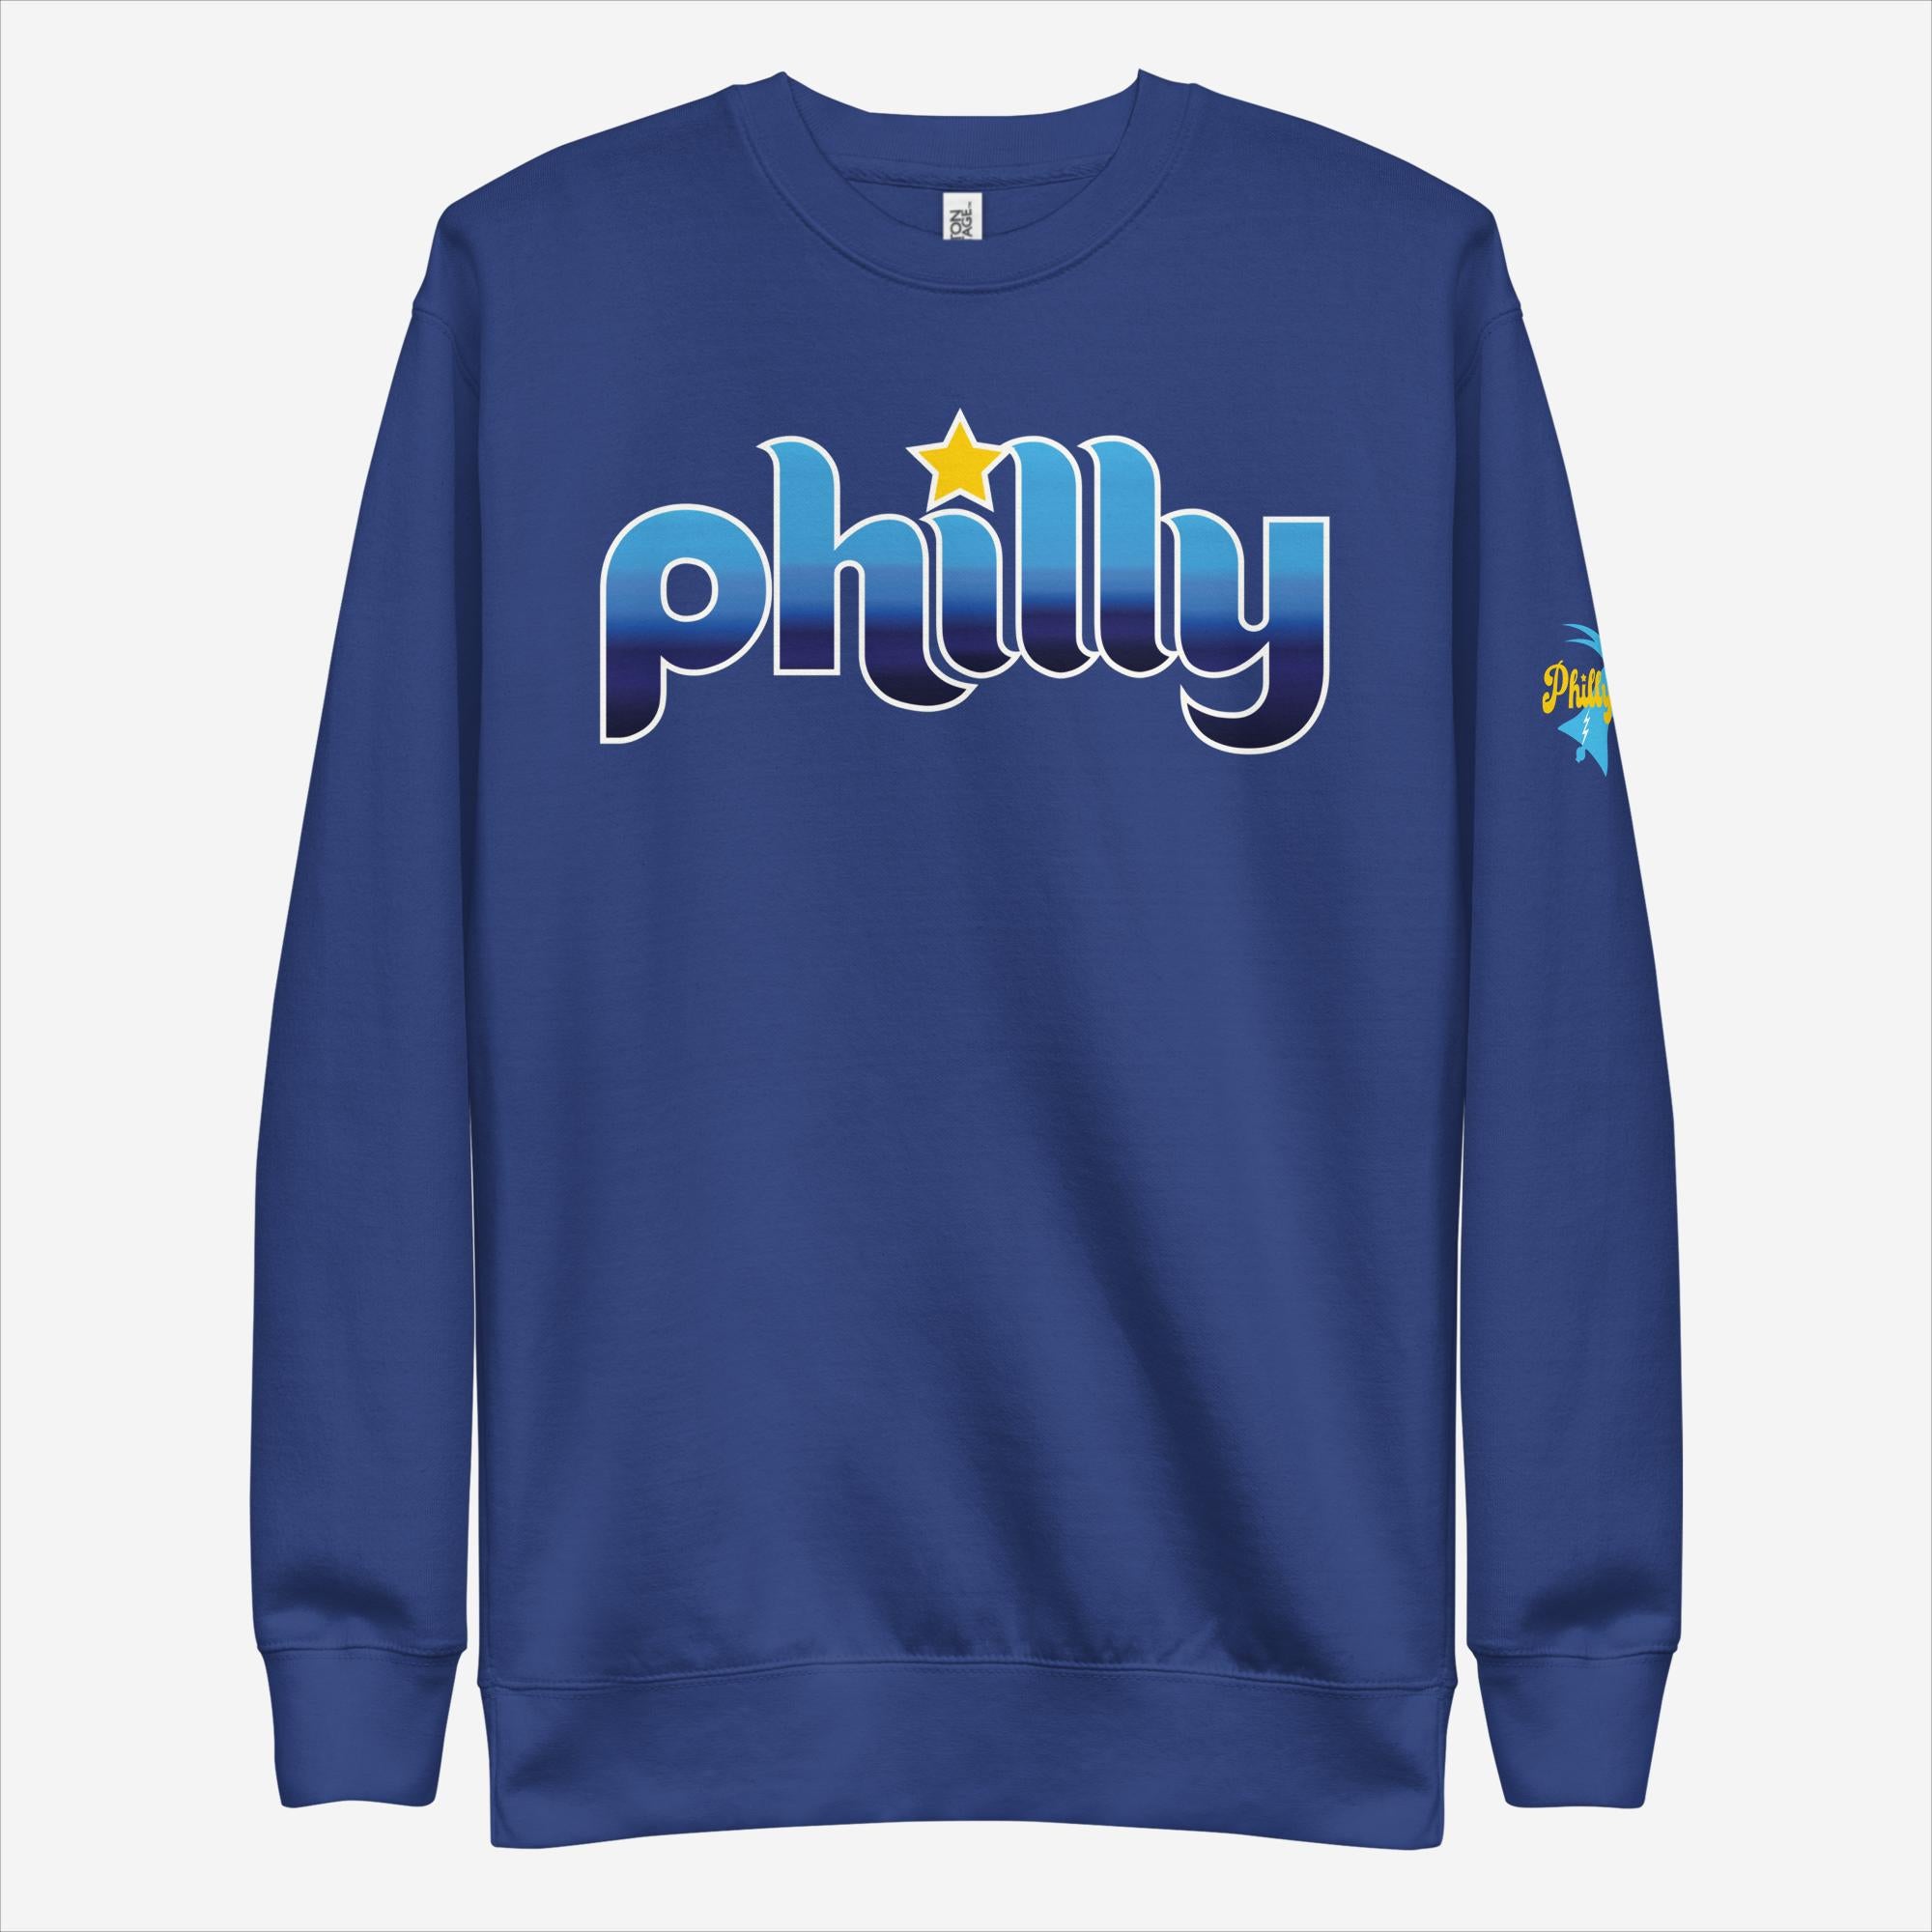 "Philly Connect" Sweatshirt